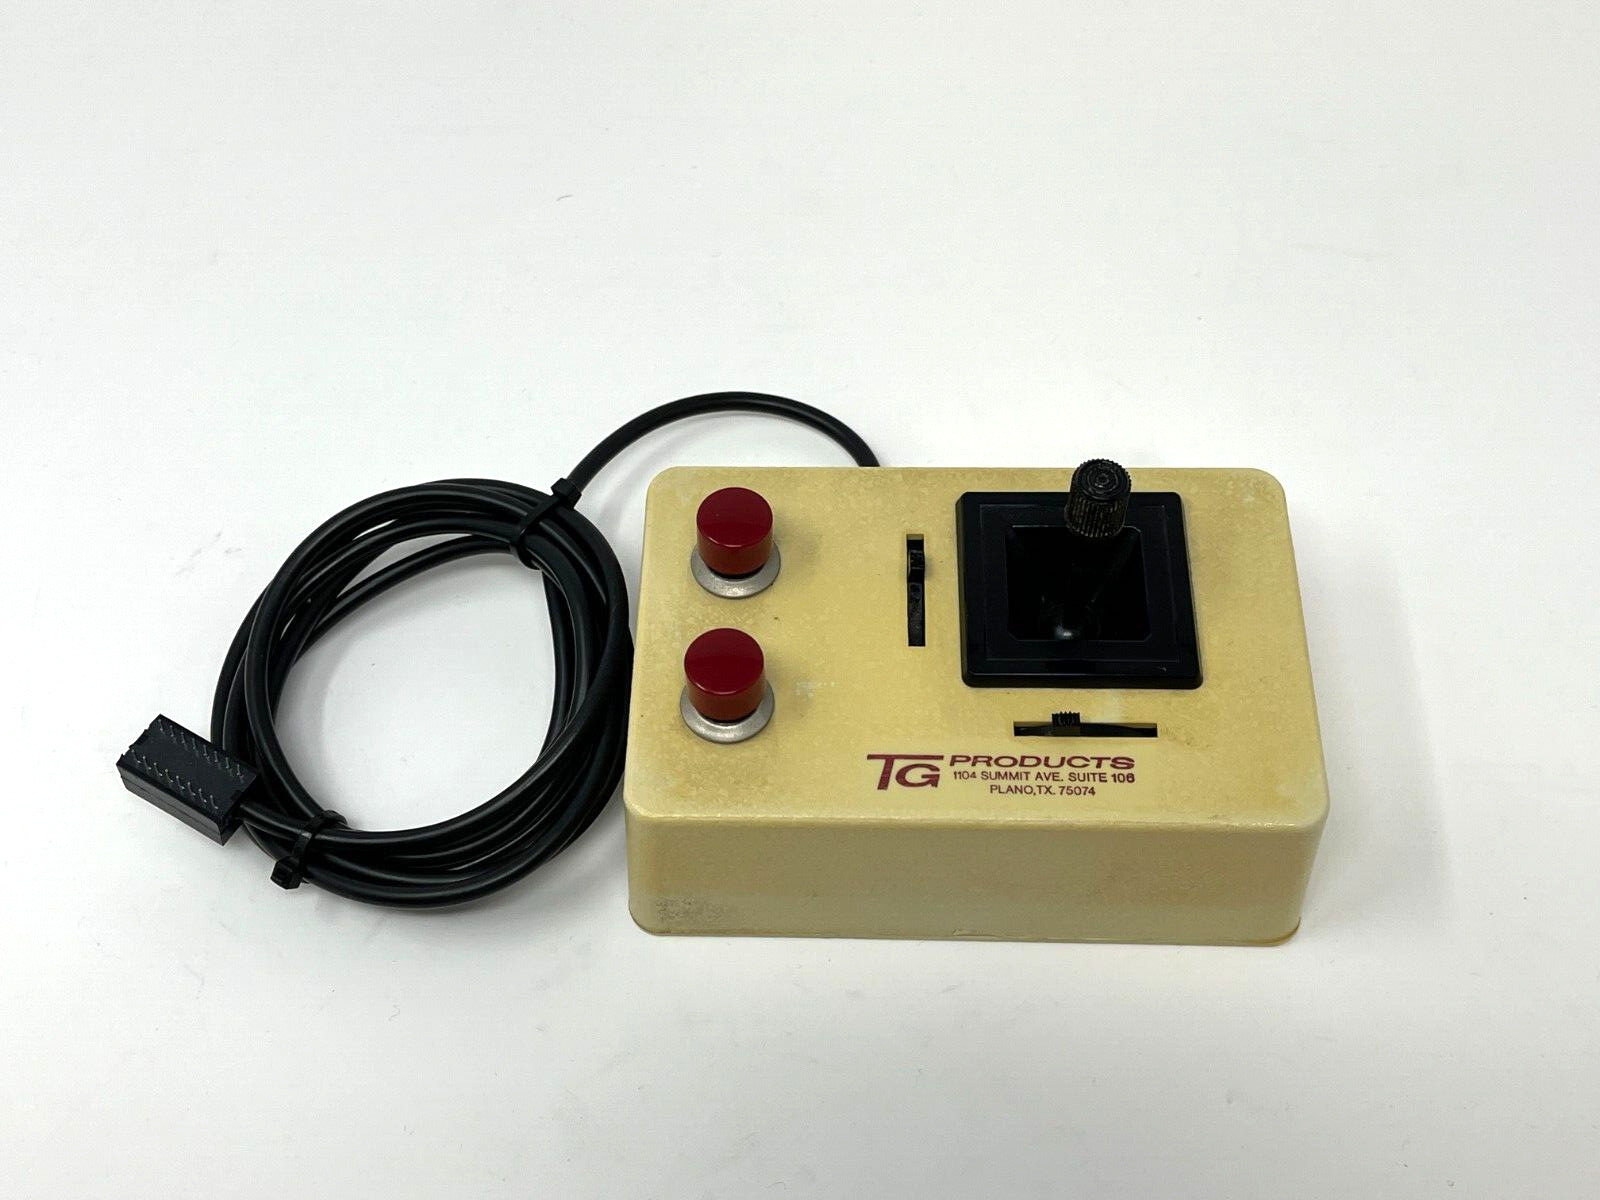 Vintage TG Products Apple II Computer Game Gaming 16 Pin Joystick 1980s